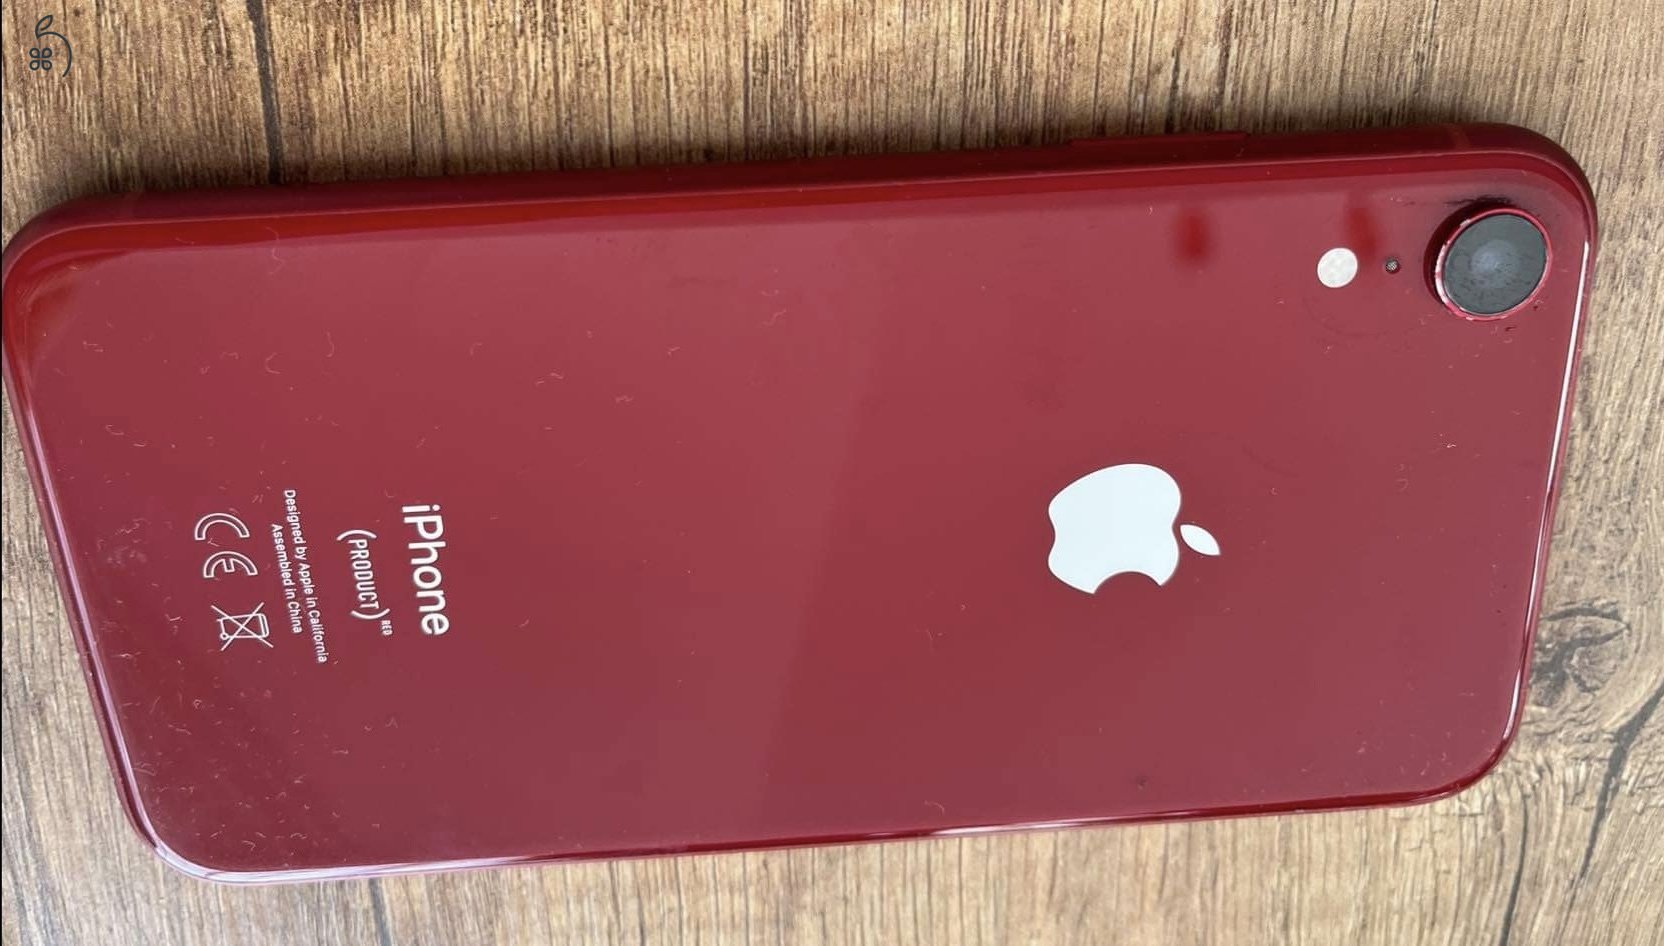 Iphone XR red